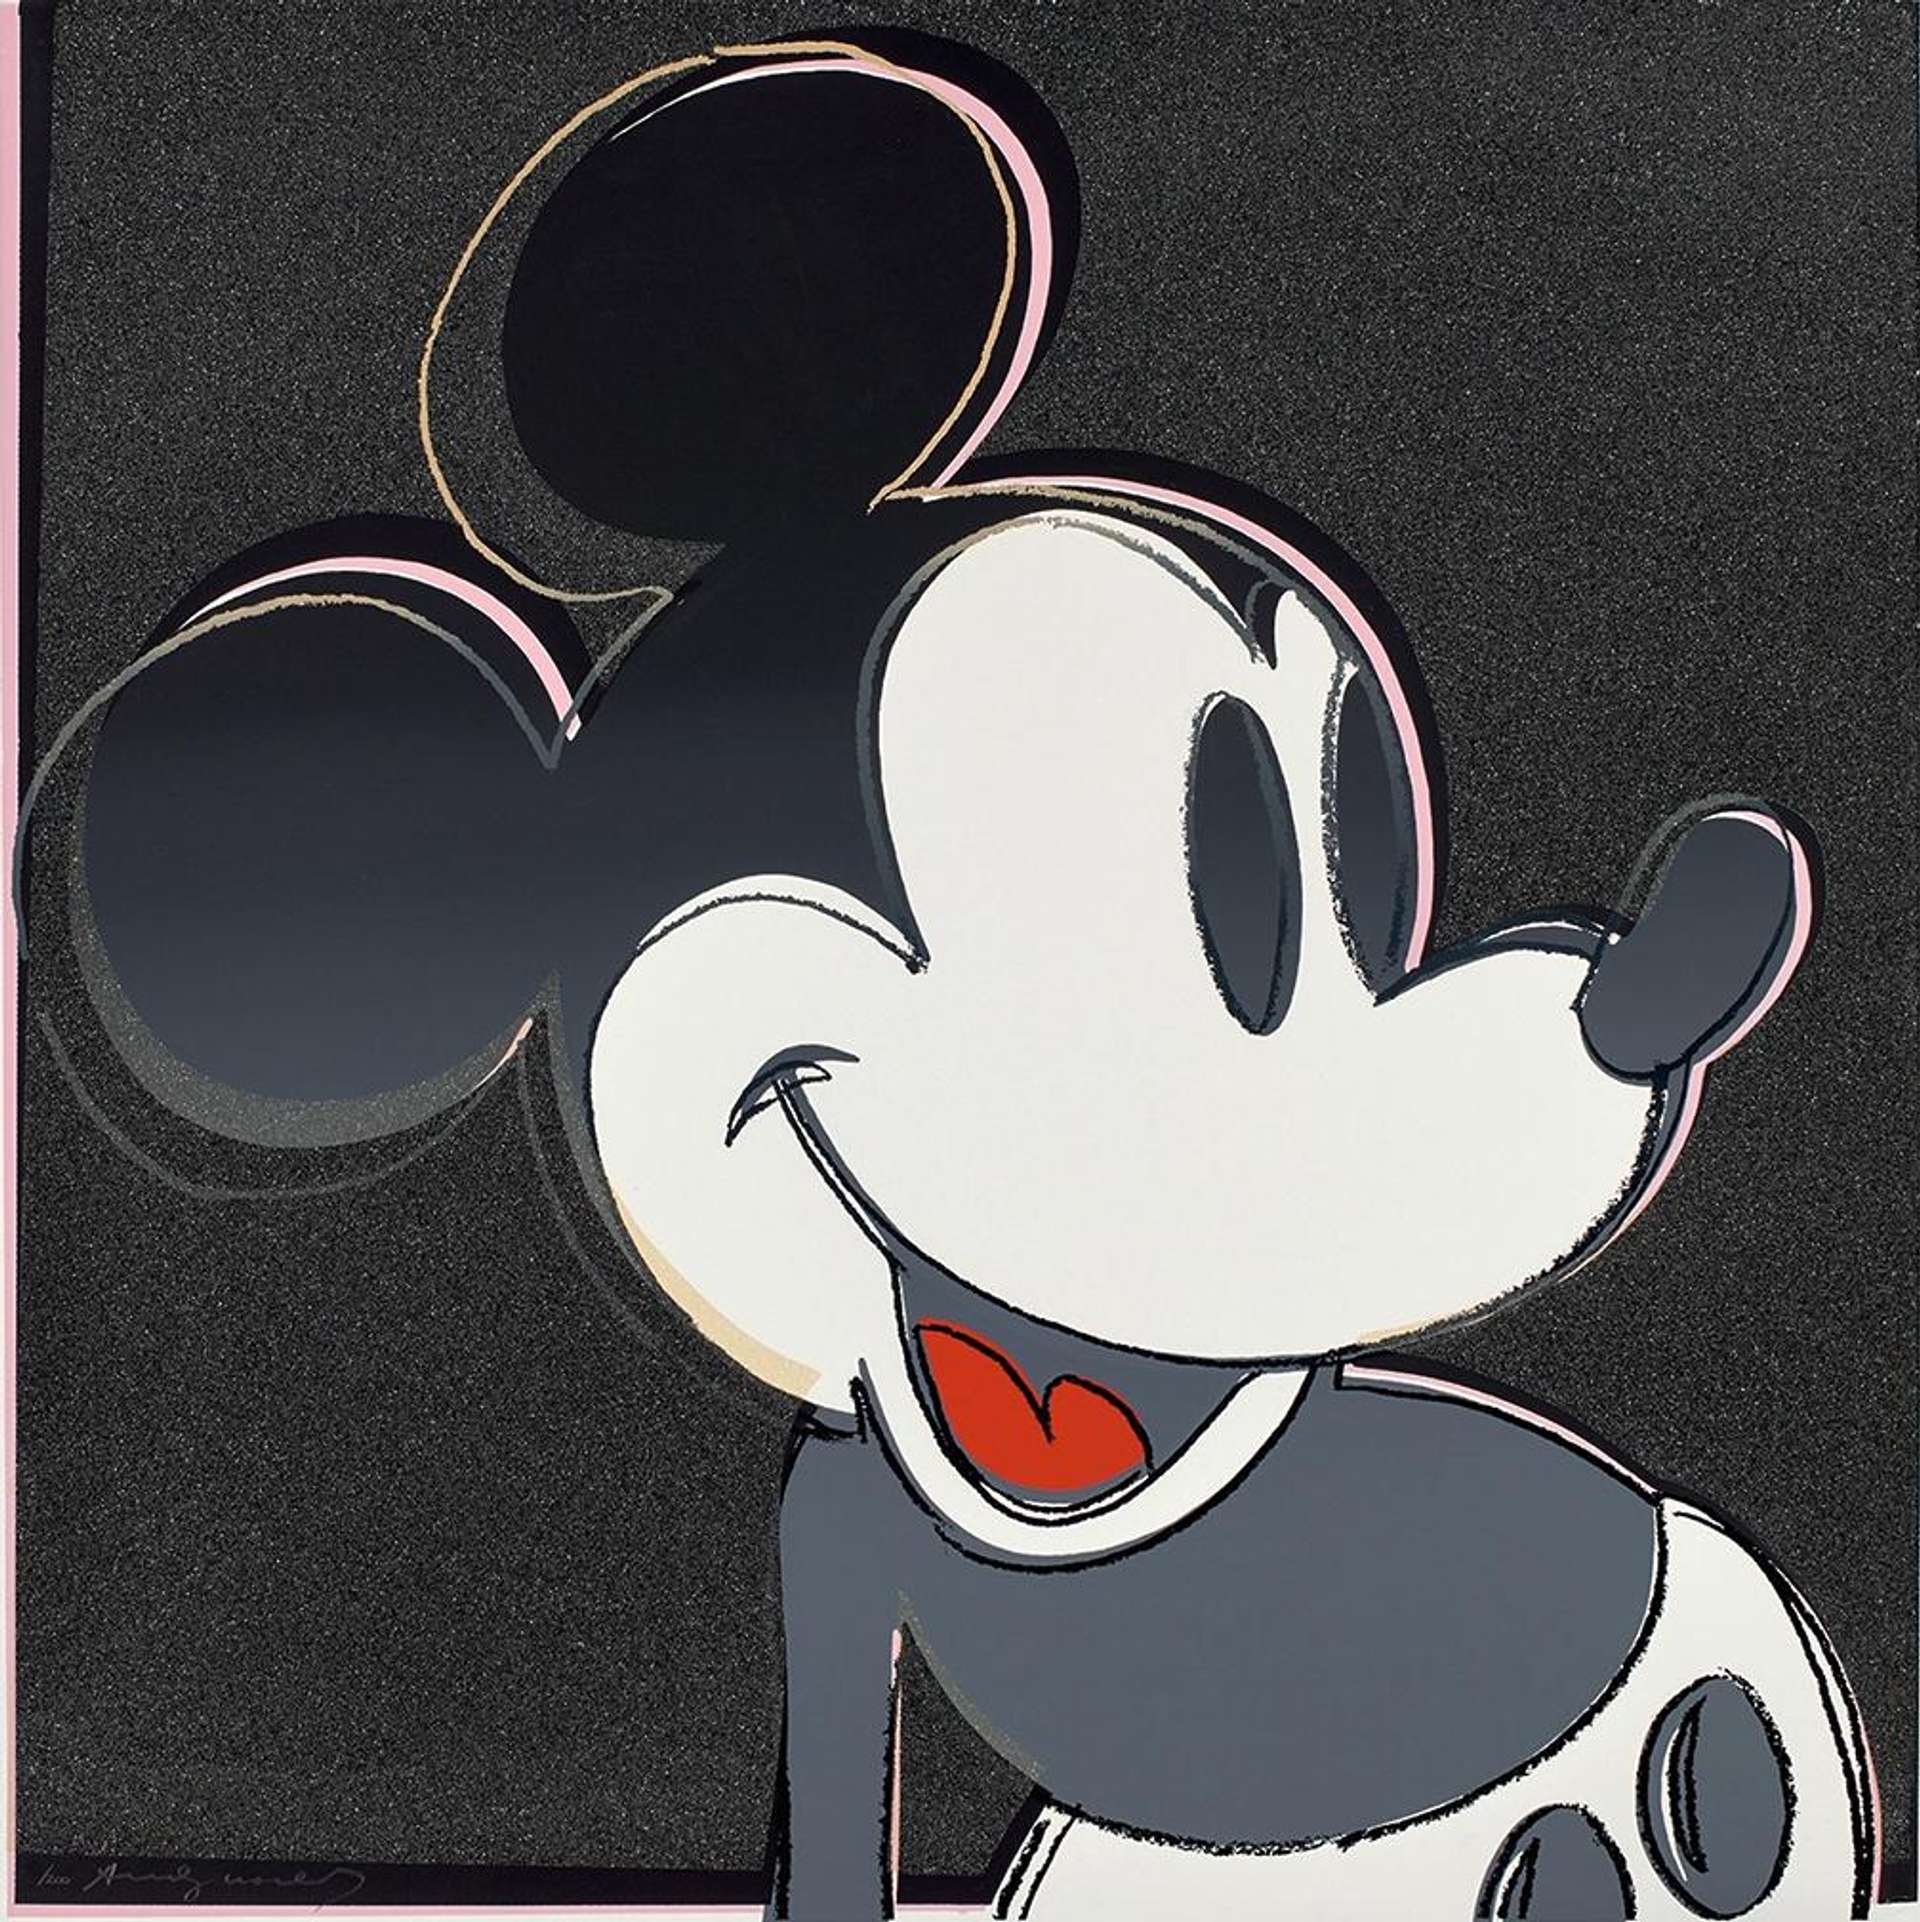 This print shows Mickey Mouse rendered from side on, looking ecstatically at something outside of the composition. Black, white and grey dominate the composition which has splashes of colour from the cartoon’s wide red grin and the pink and gold gestural lines that outline the mouse’s smiling face.